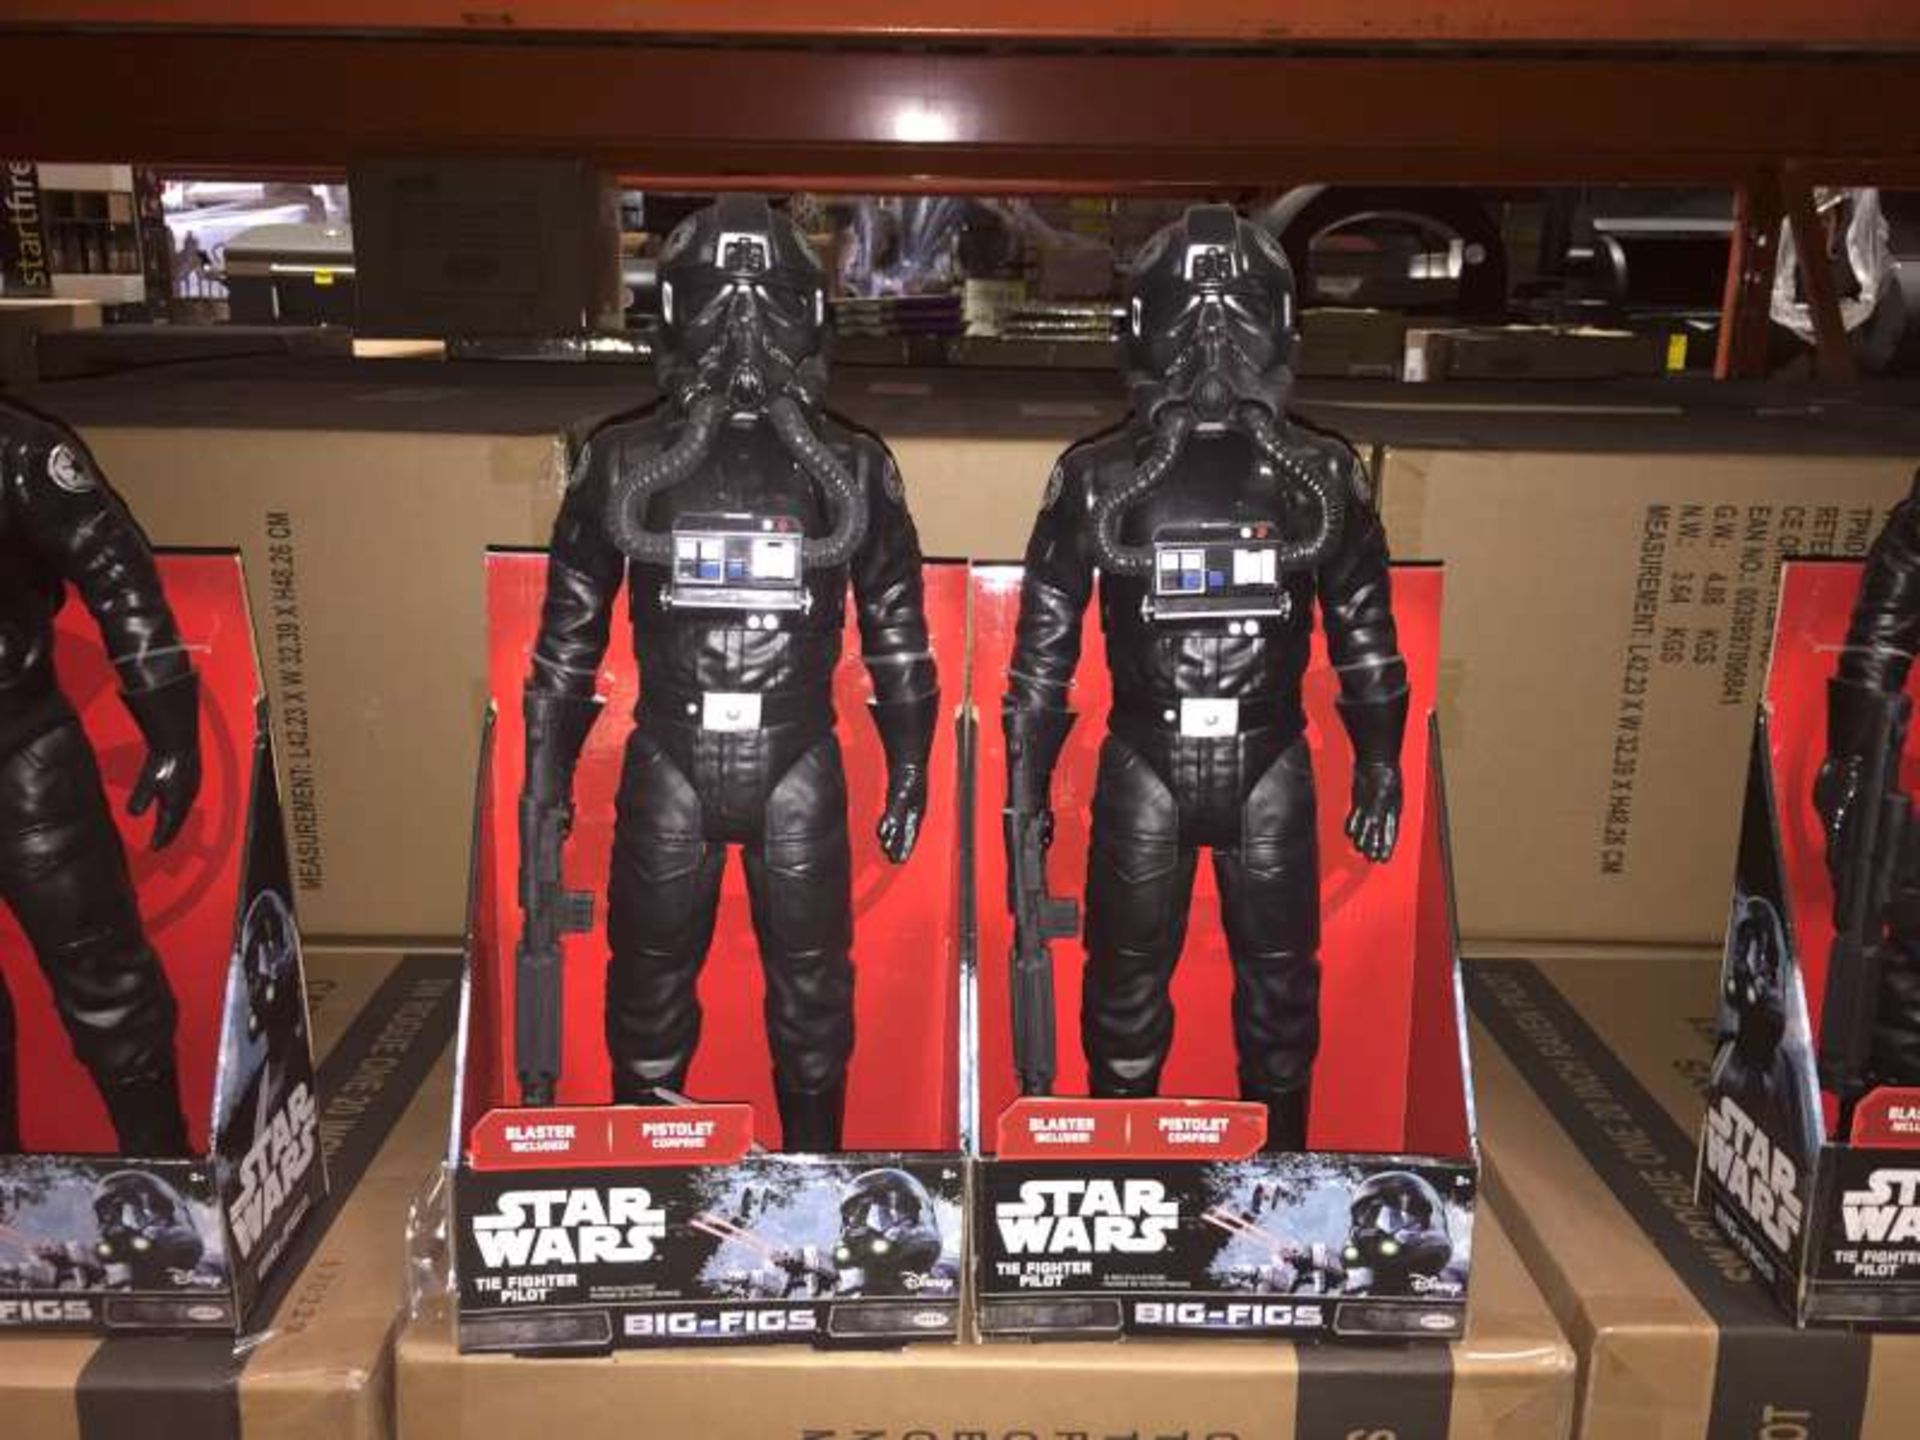 12 X BRAND NEW BOXED STAR WARS 18 INCH ROUGE ONE RAVEN PILOT FIGURE IN 2 BOXES